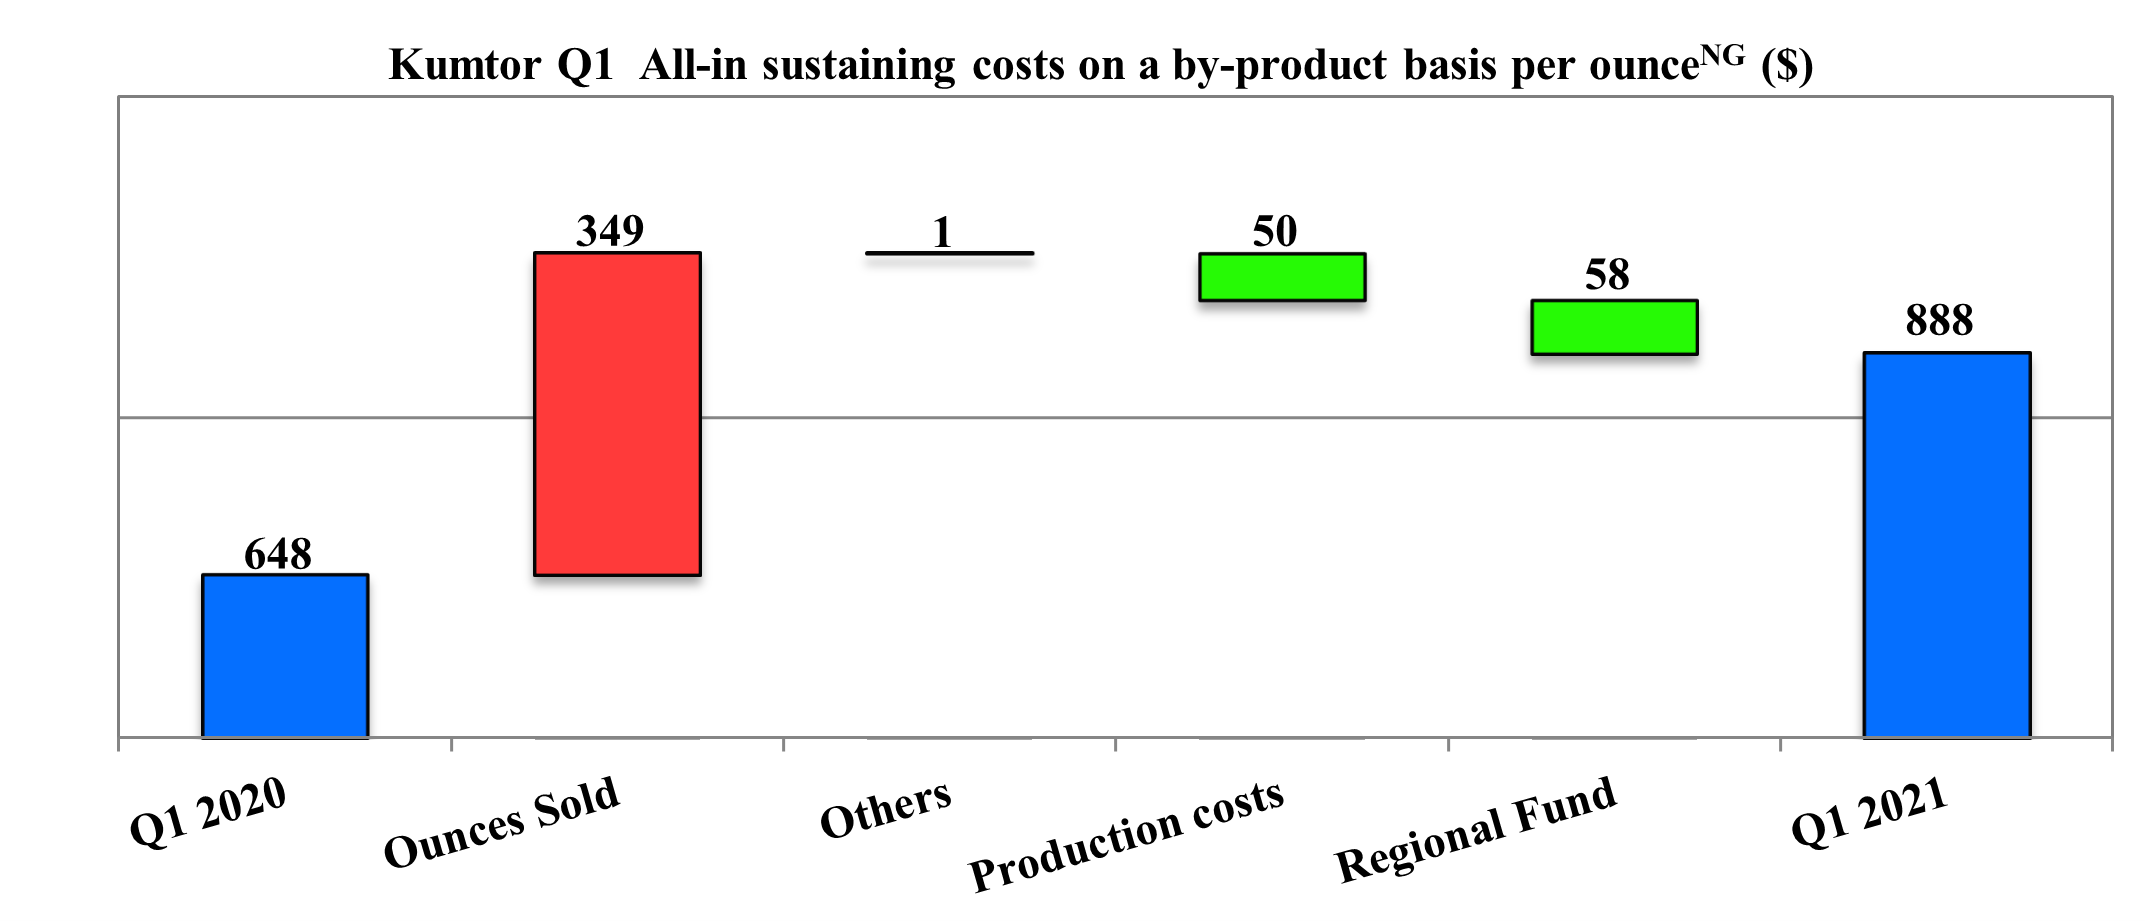 Kumtor Q1 All-in sustaining costs on a by-product basis per ounce (Non-GAAP) ($)